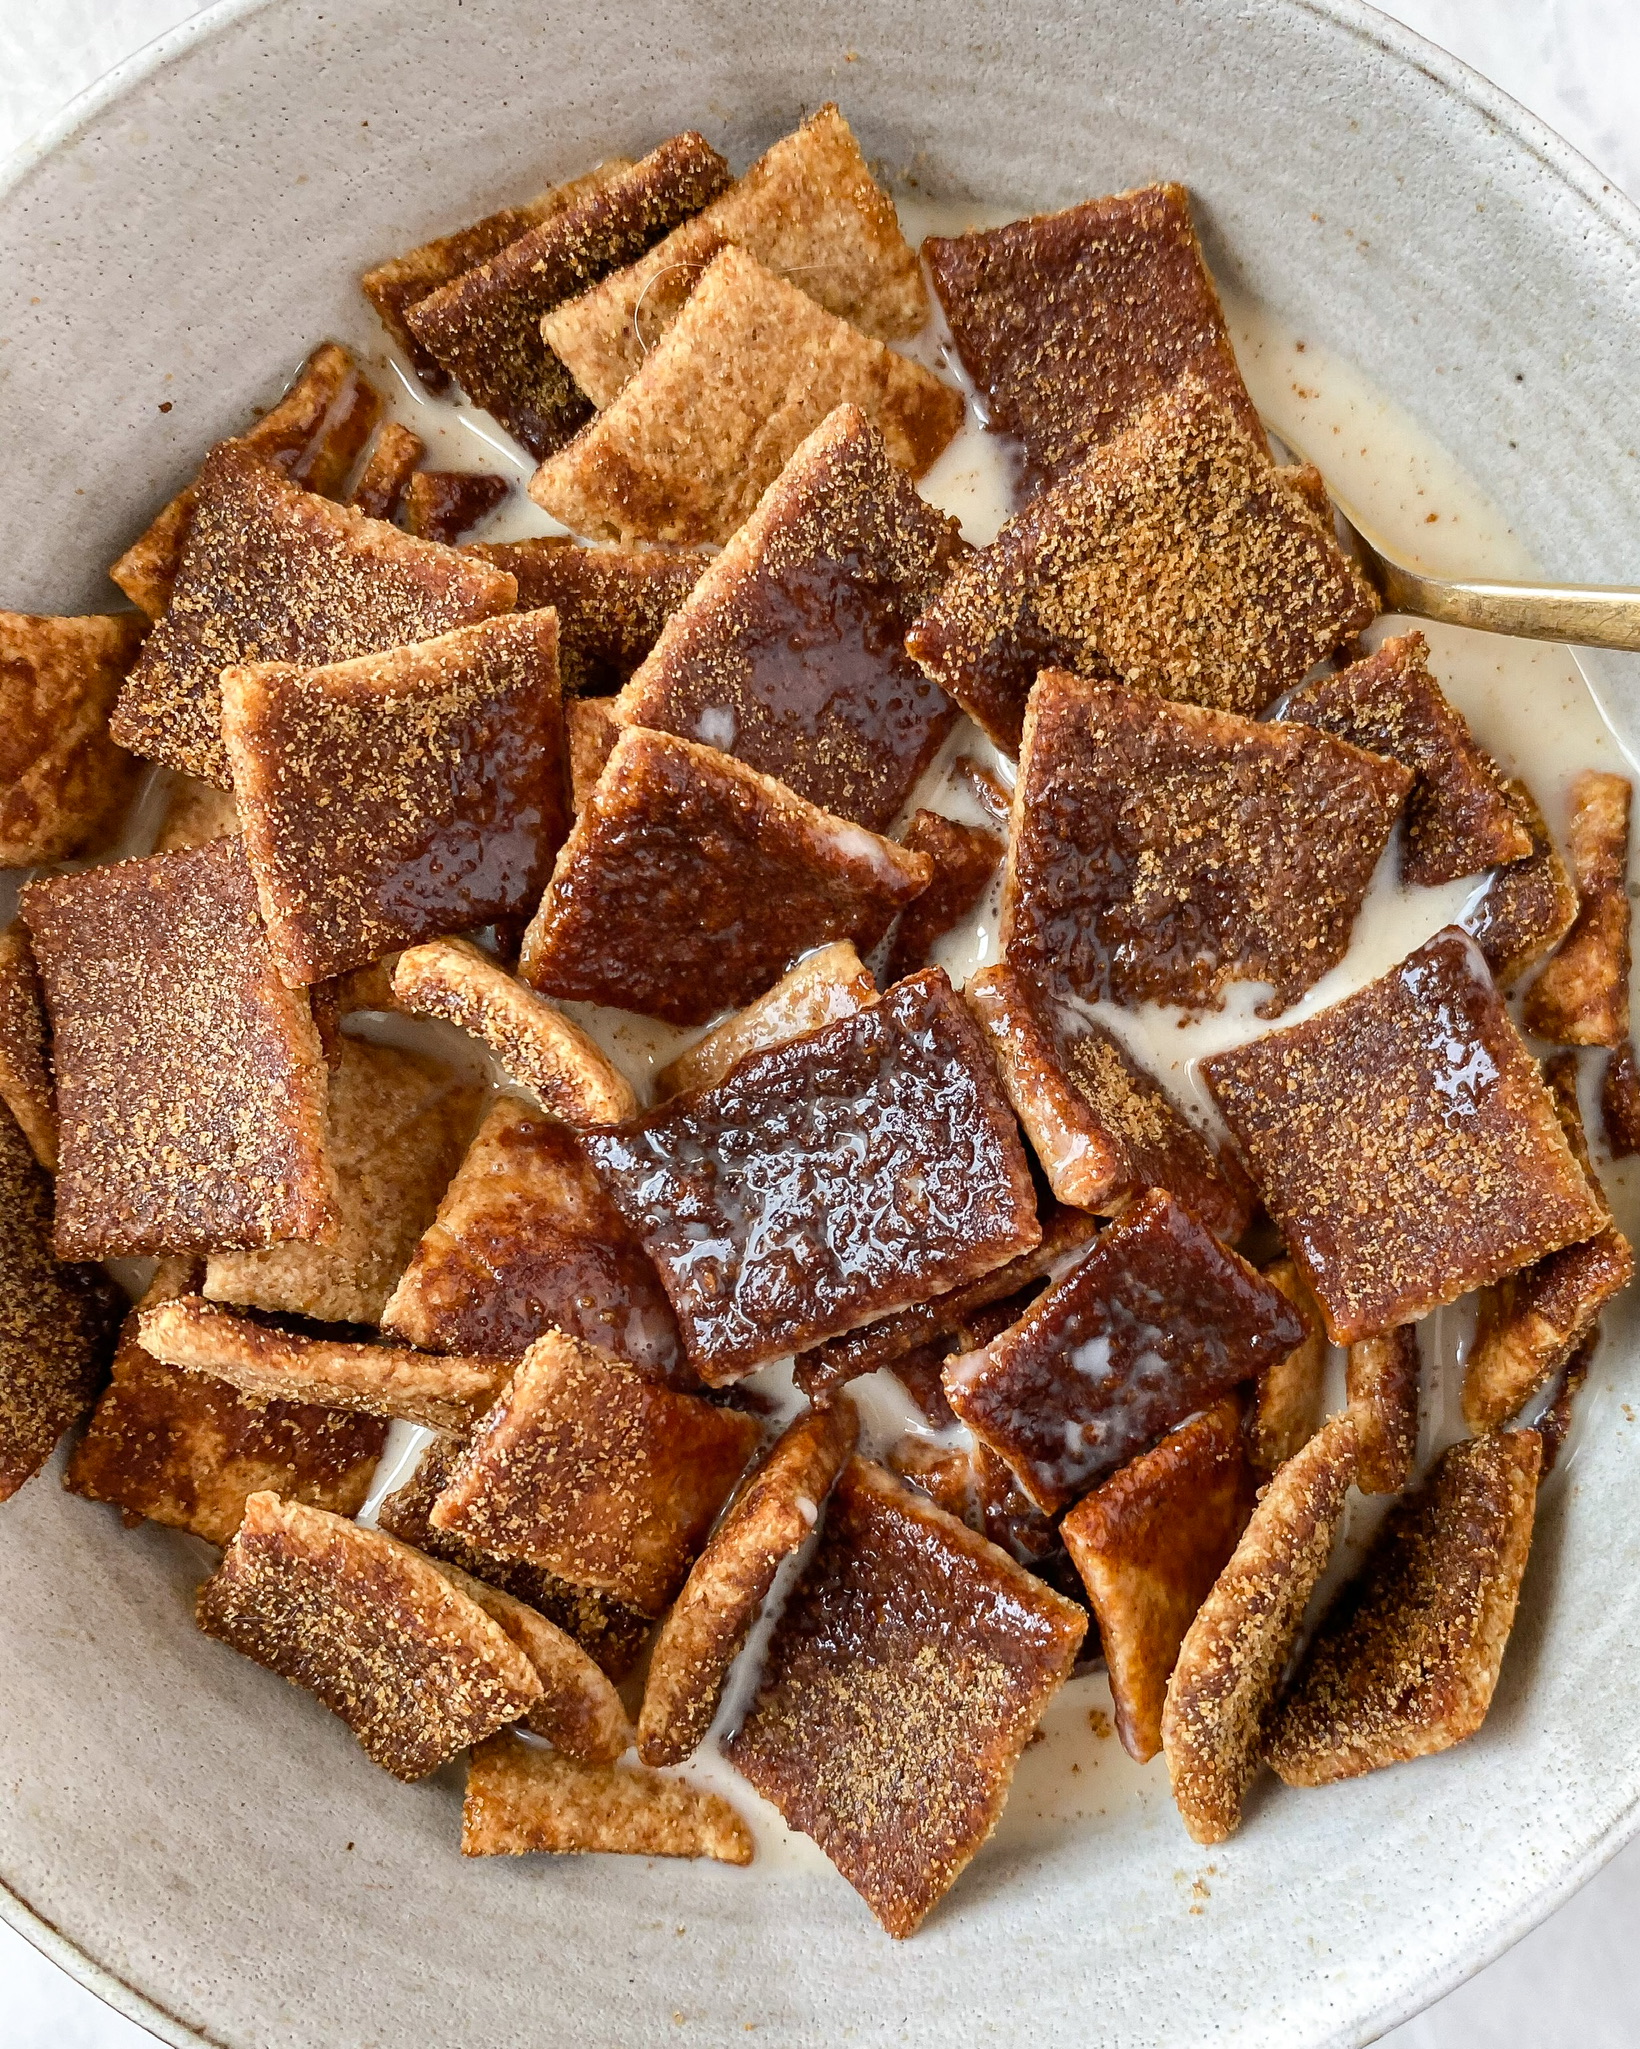 8 Things You Should Know About Cinnamon Toast Crunch